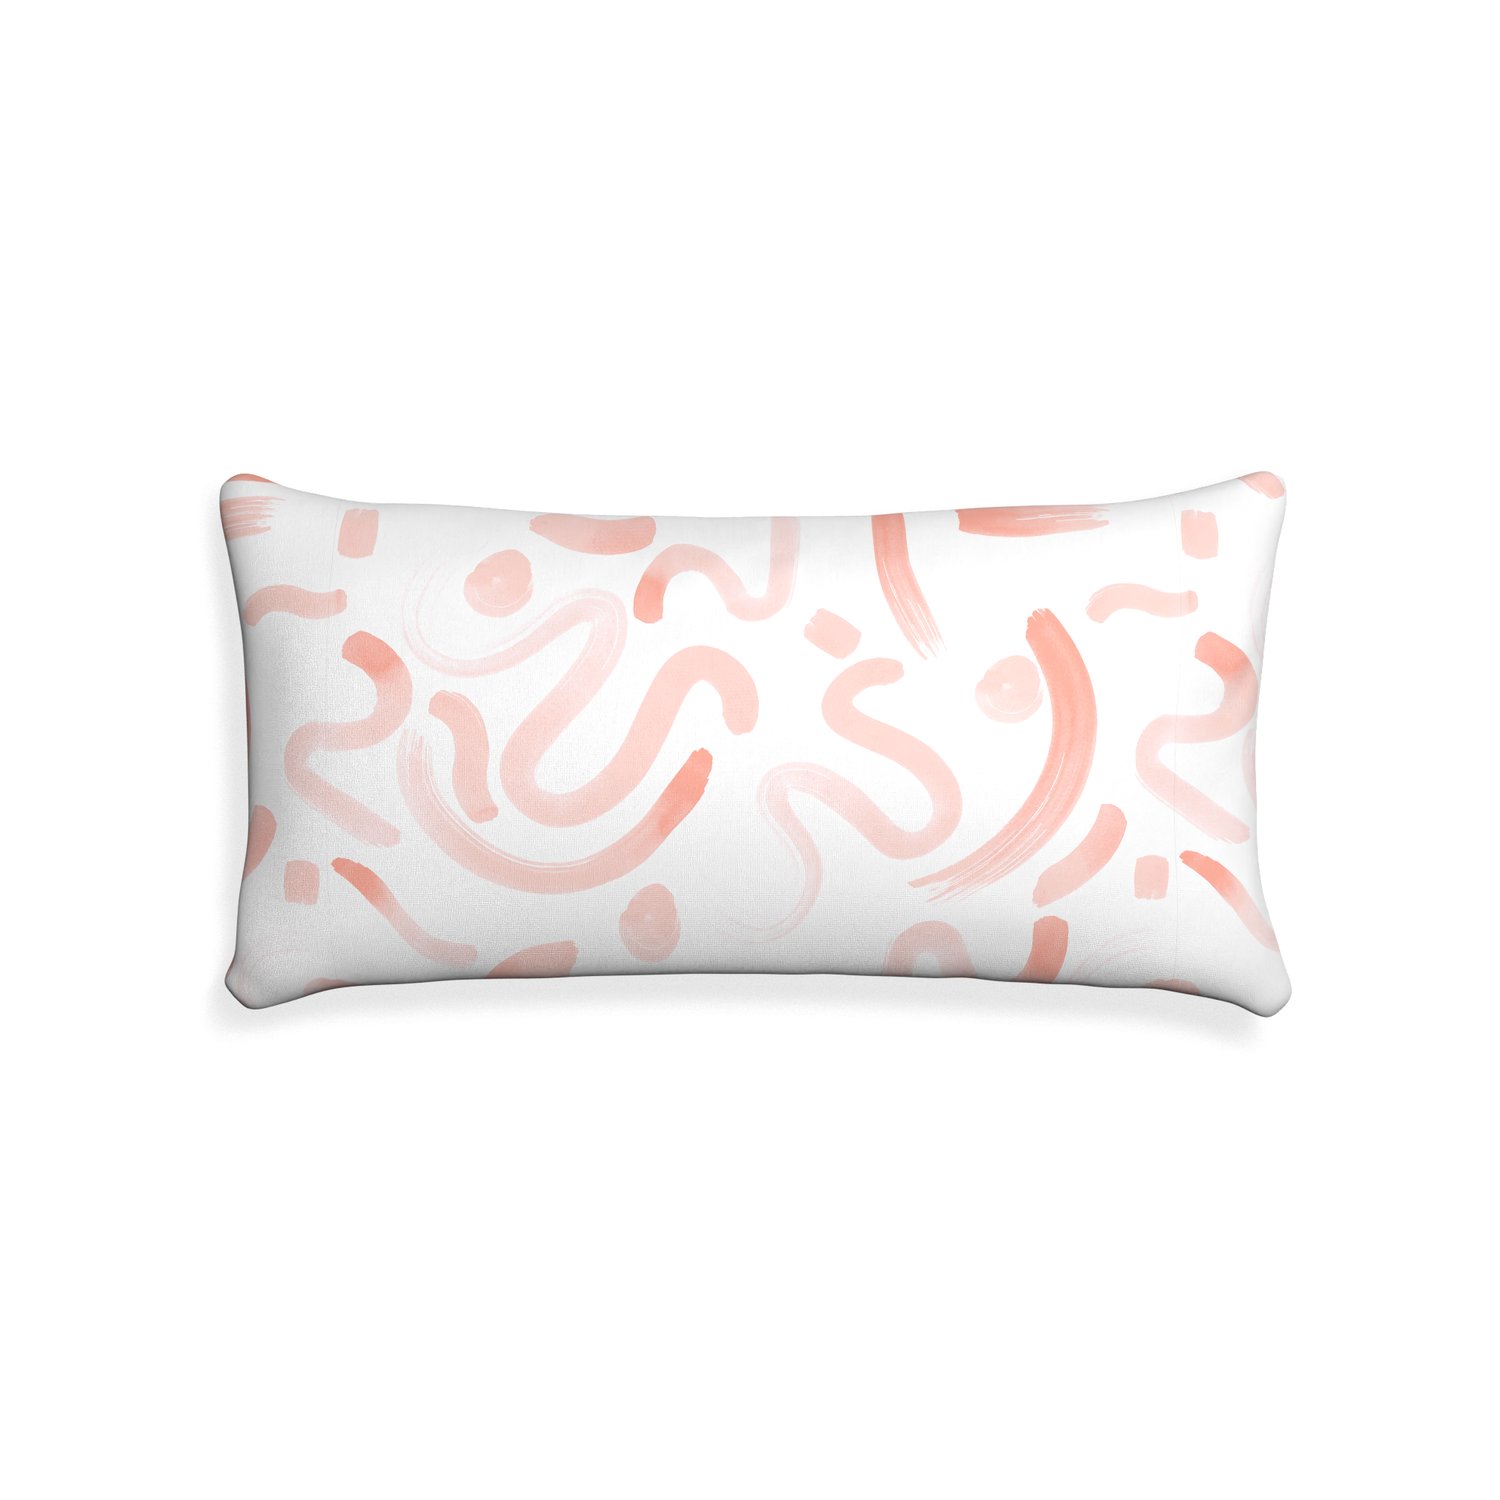 Midi-lumbar hockney pink custom pink graphicpillow with none on white background